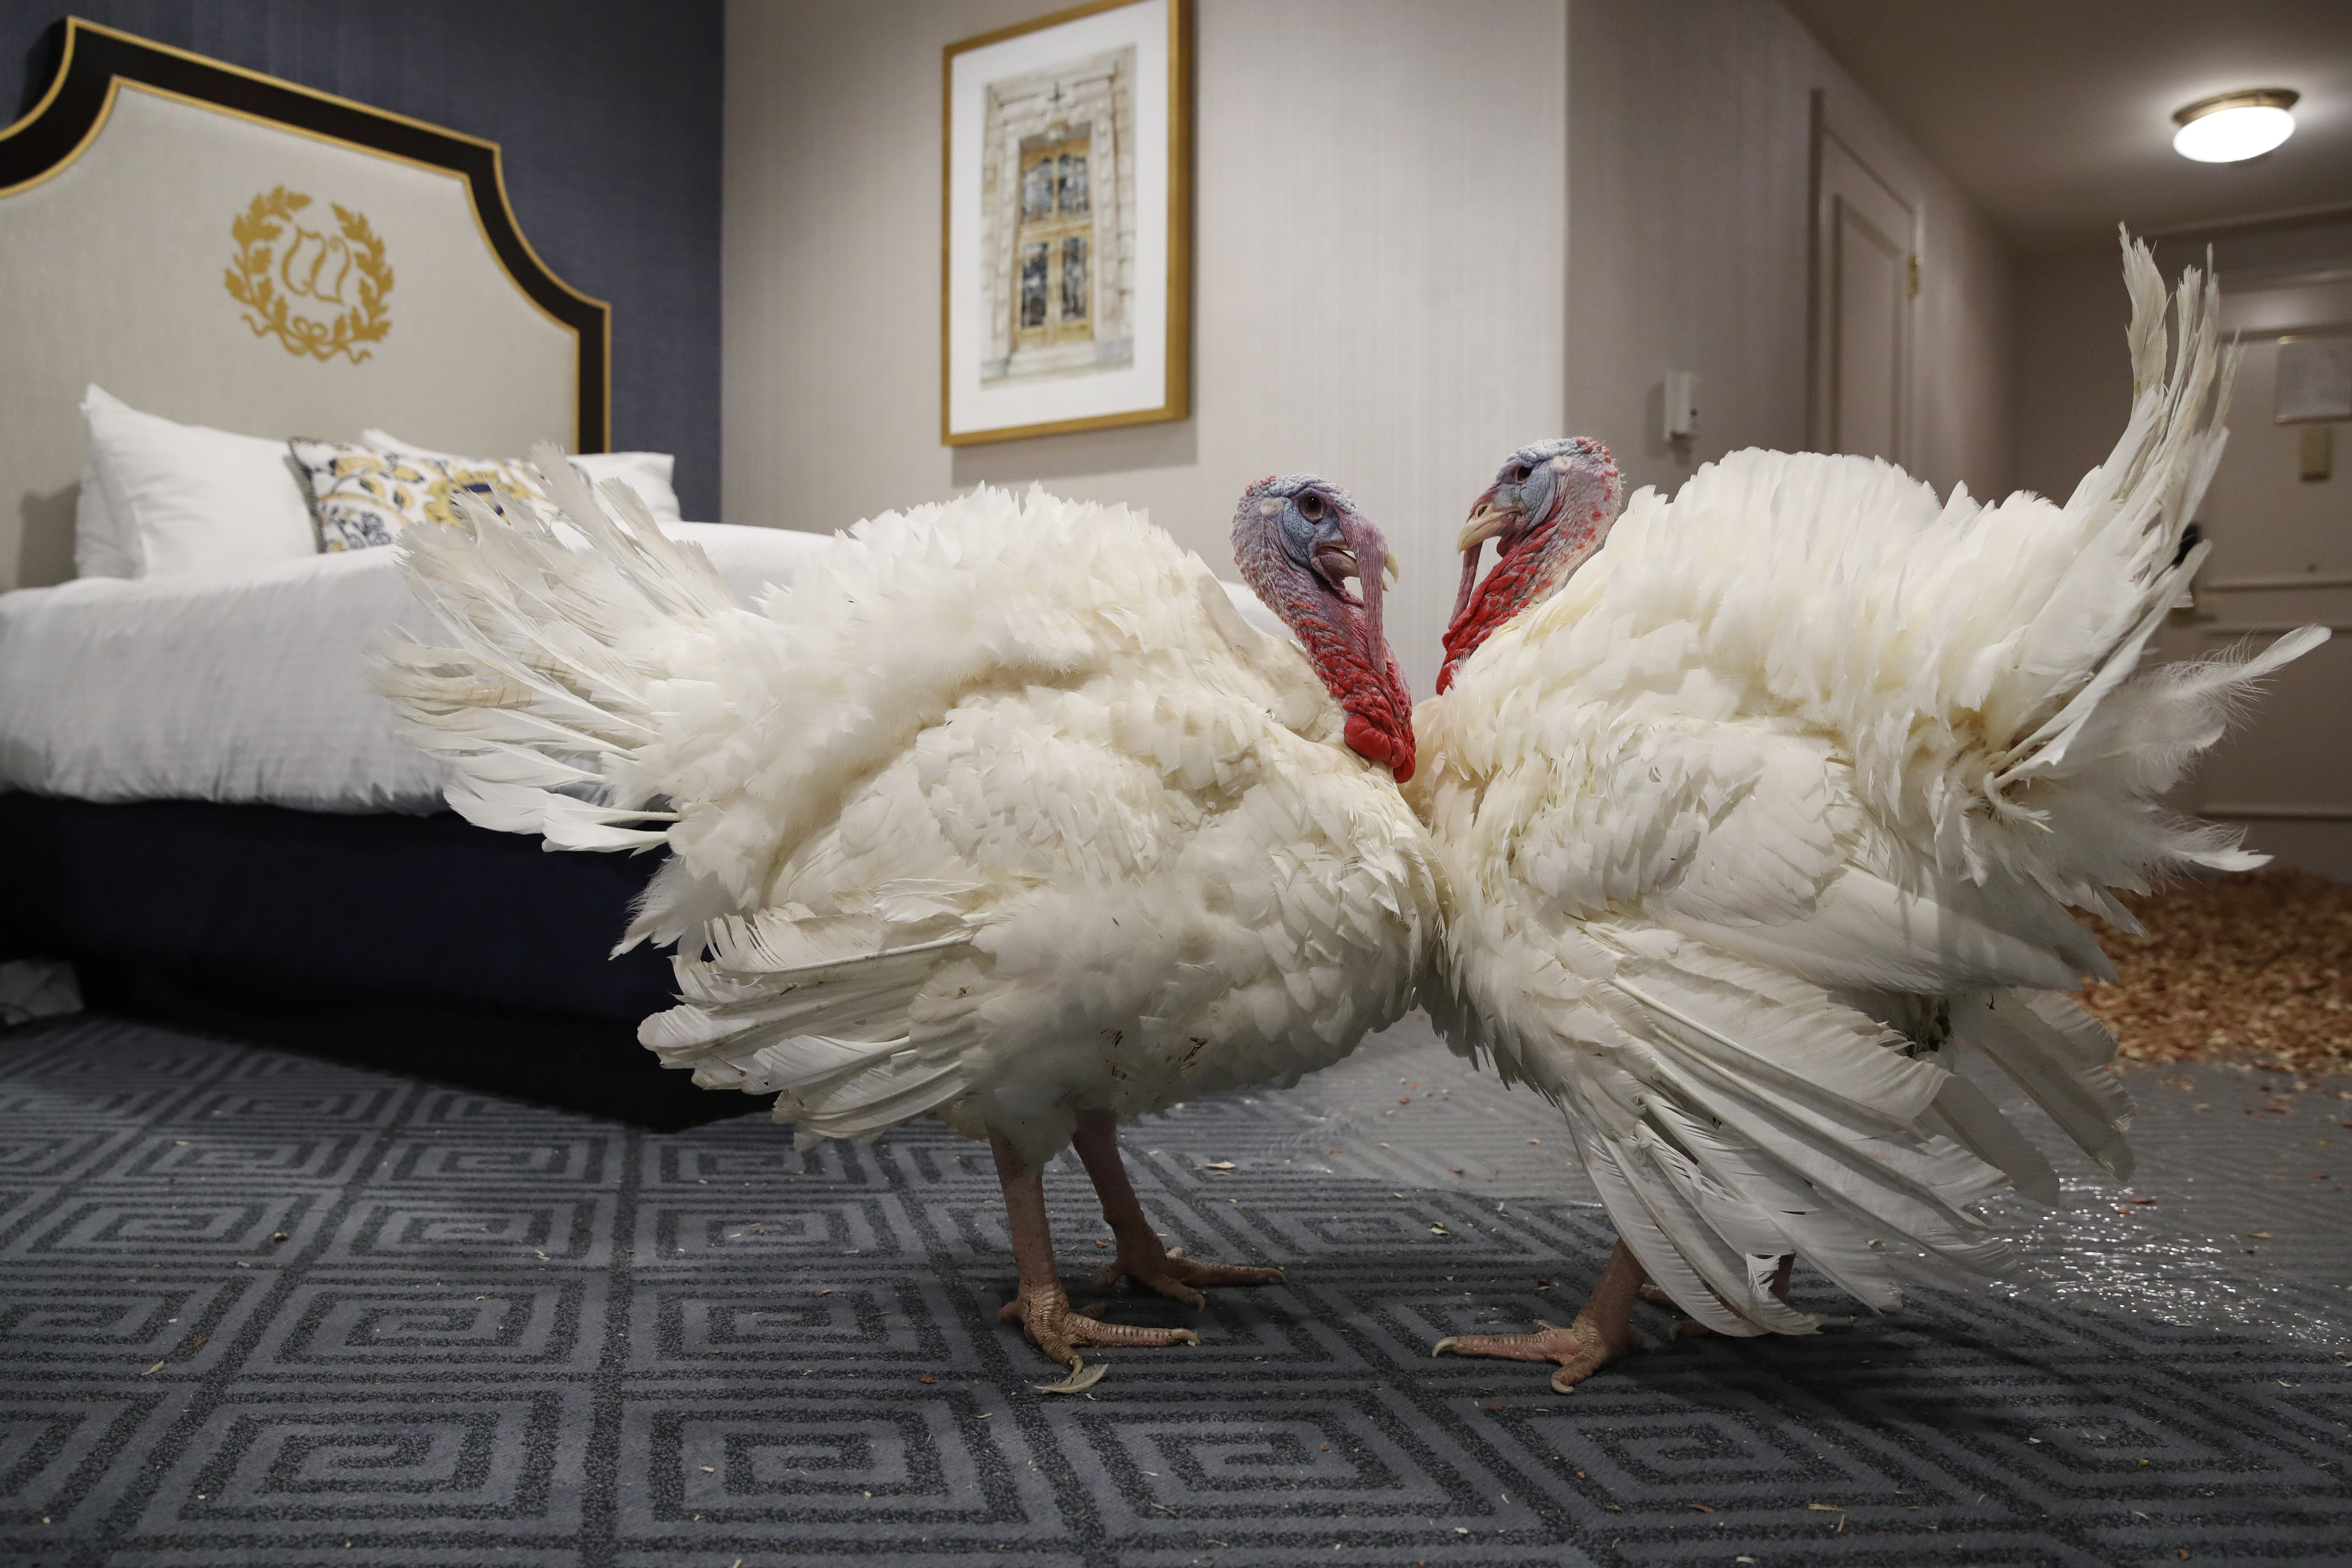 Peas and Carrots get comfortable in their room at the Willard InterContinental Hotel, after their arrival Sunday in Washington. 